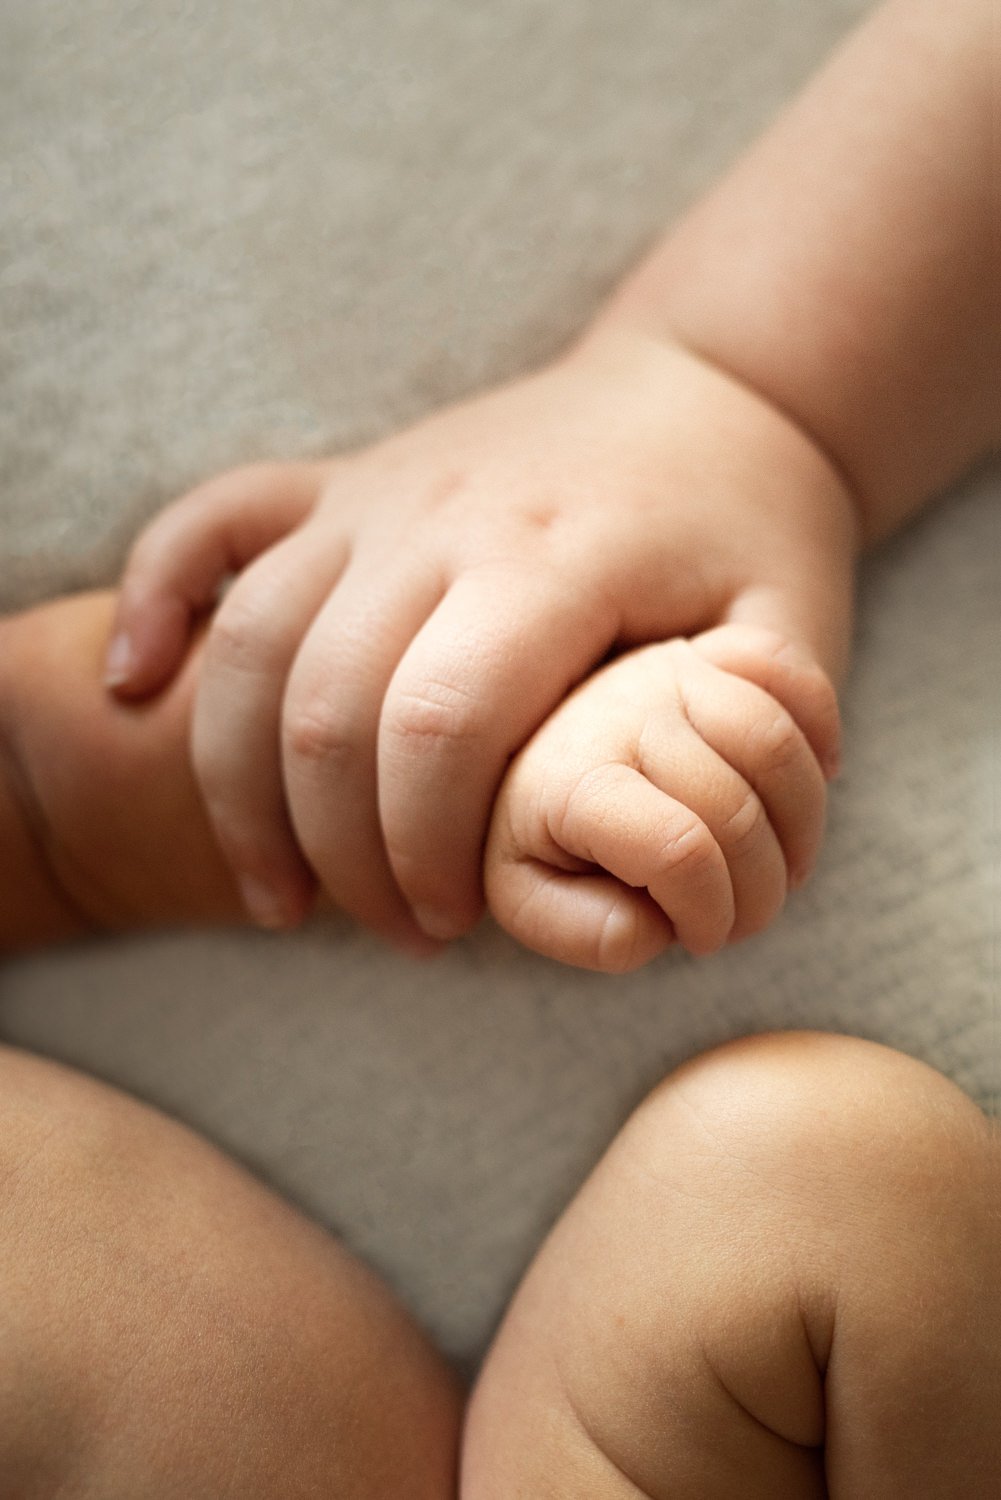 Sibling Holding Baby's Hand